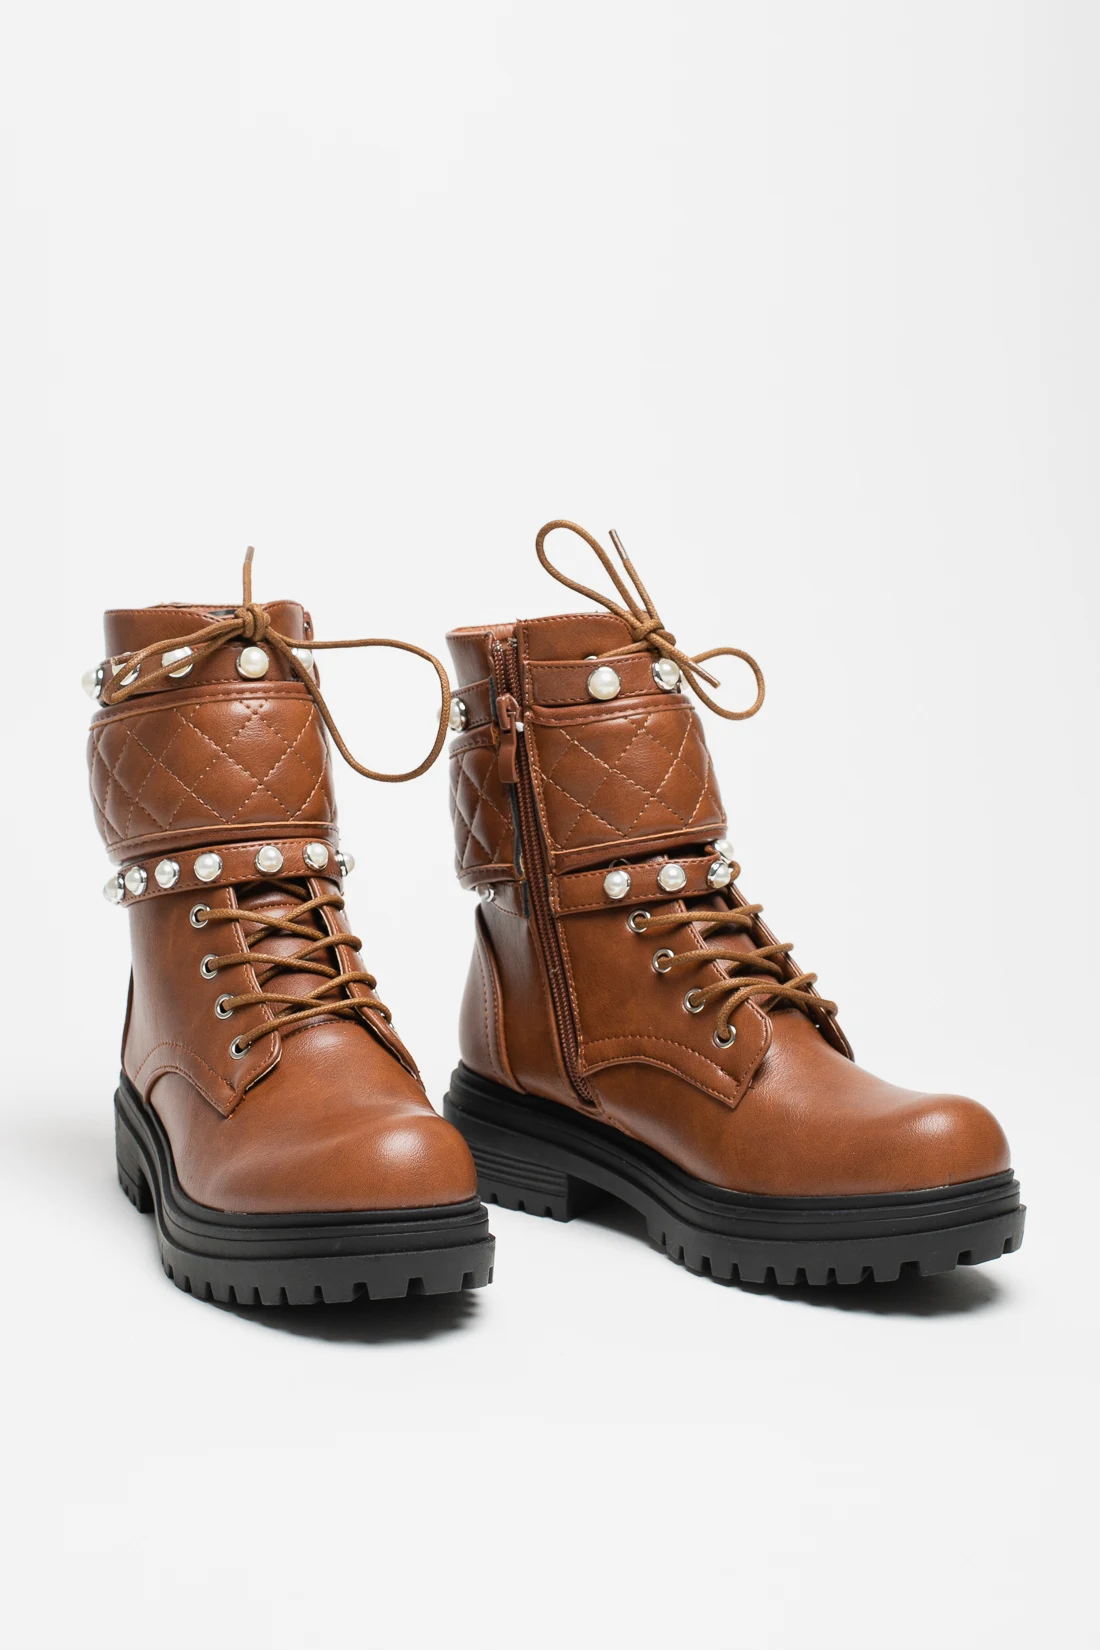 MILITARY CROUSER BOOT - CAMEL